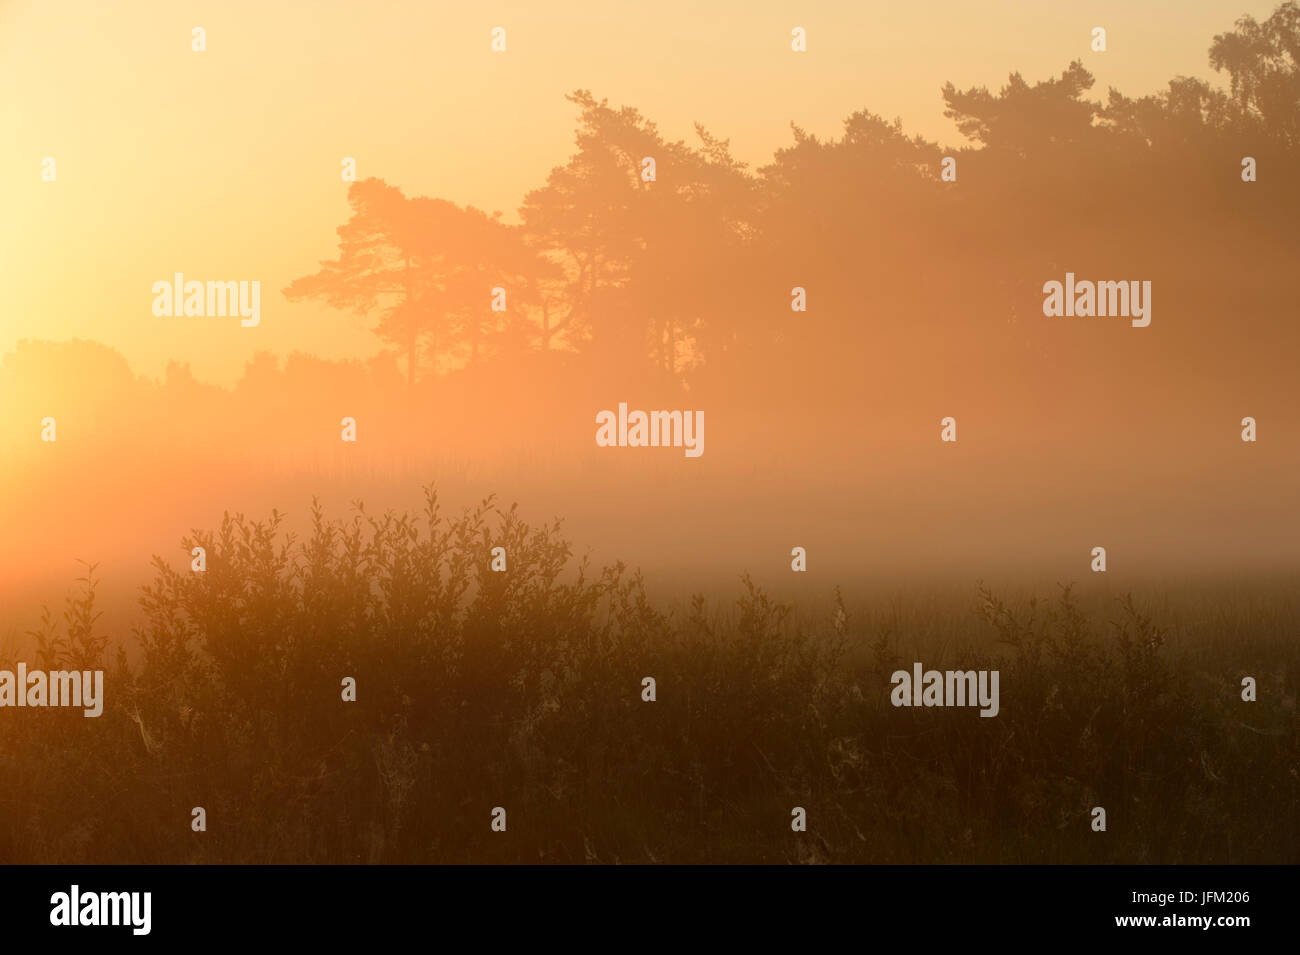 Summer sunrise with mist in a moor with willows and pine trees. Klein Bylaer, Barneveld, Netherlands, Europe Stock Photo